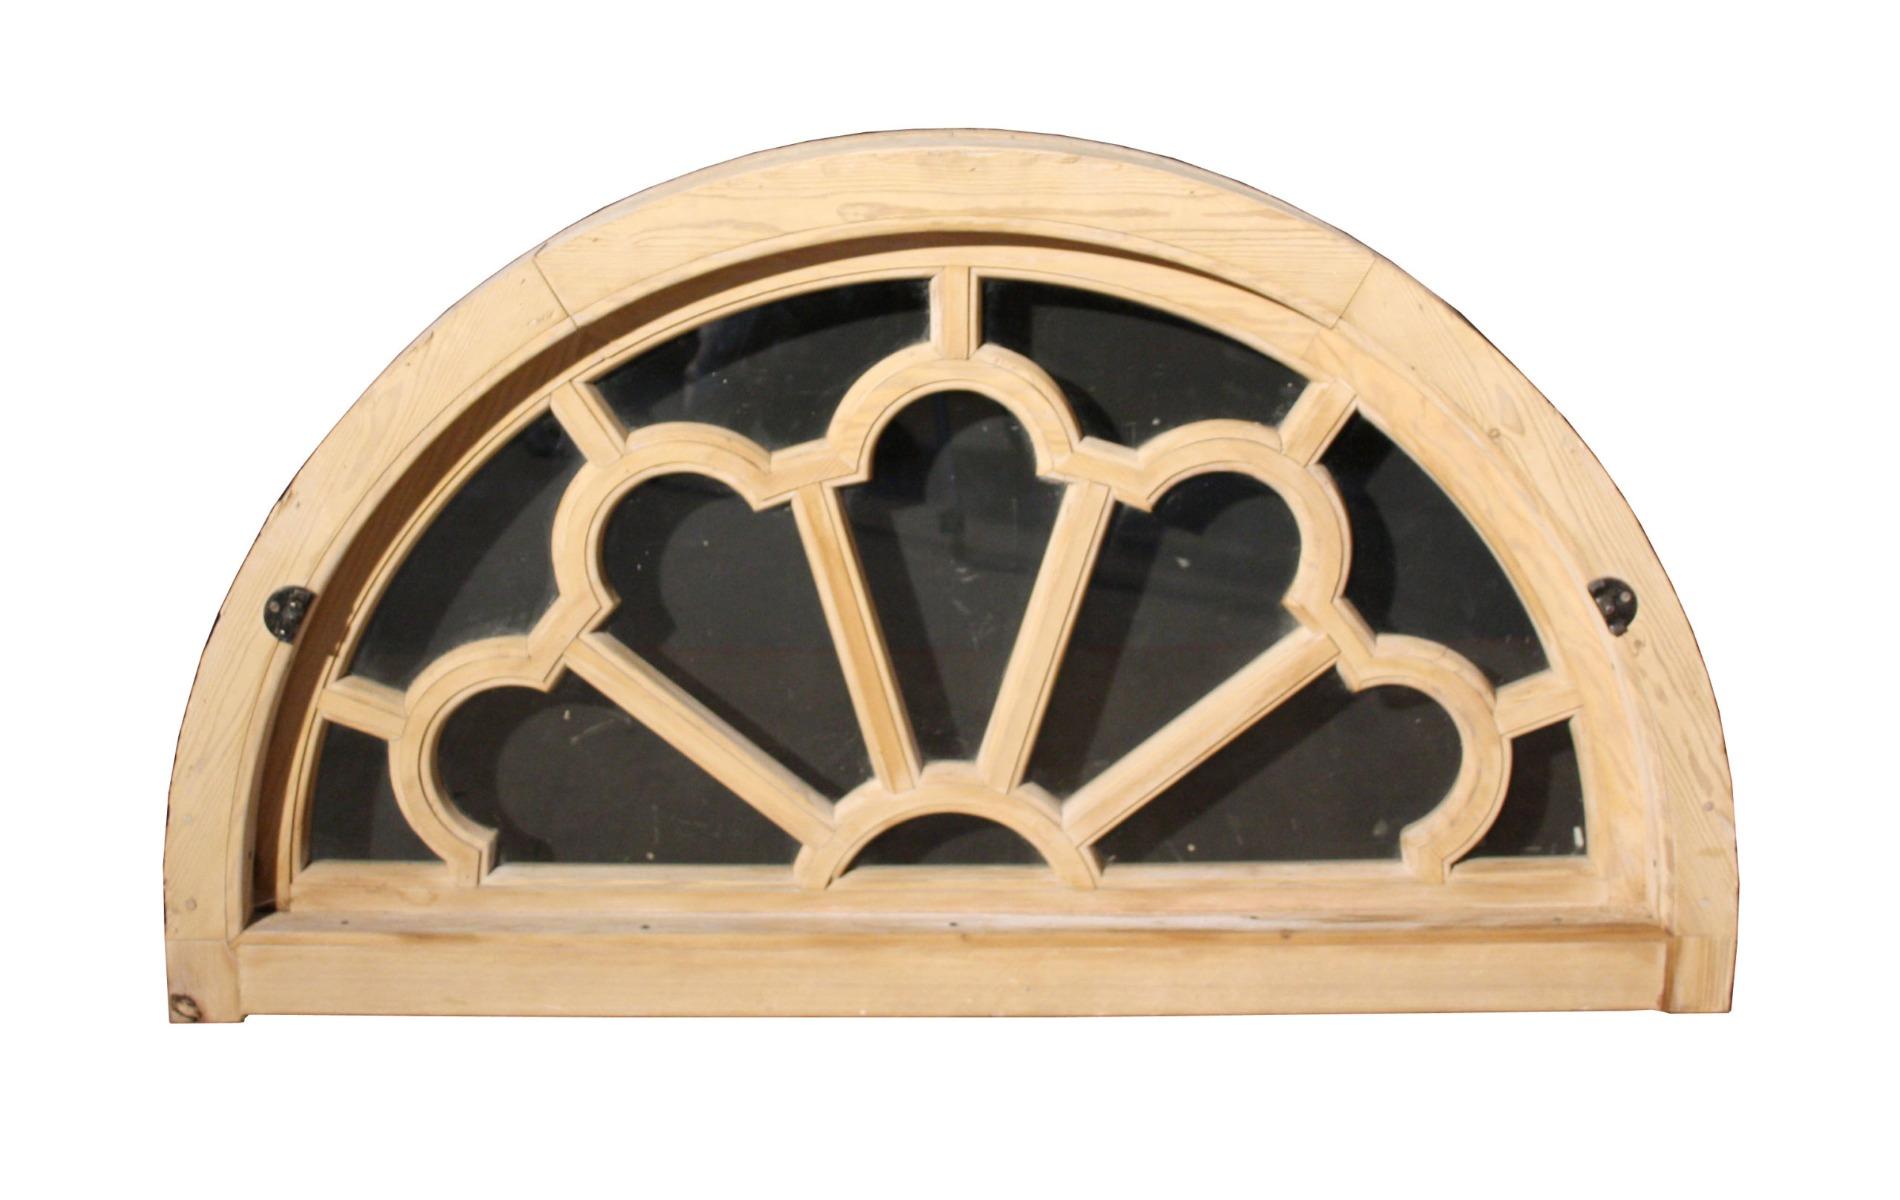 An antique fanlight constructed from pine. Glazed with clear glass and fitted within its original frame.